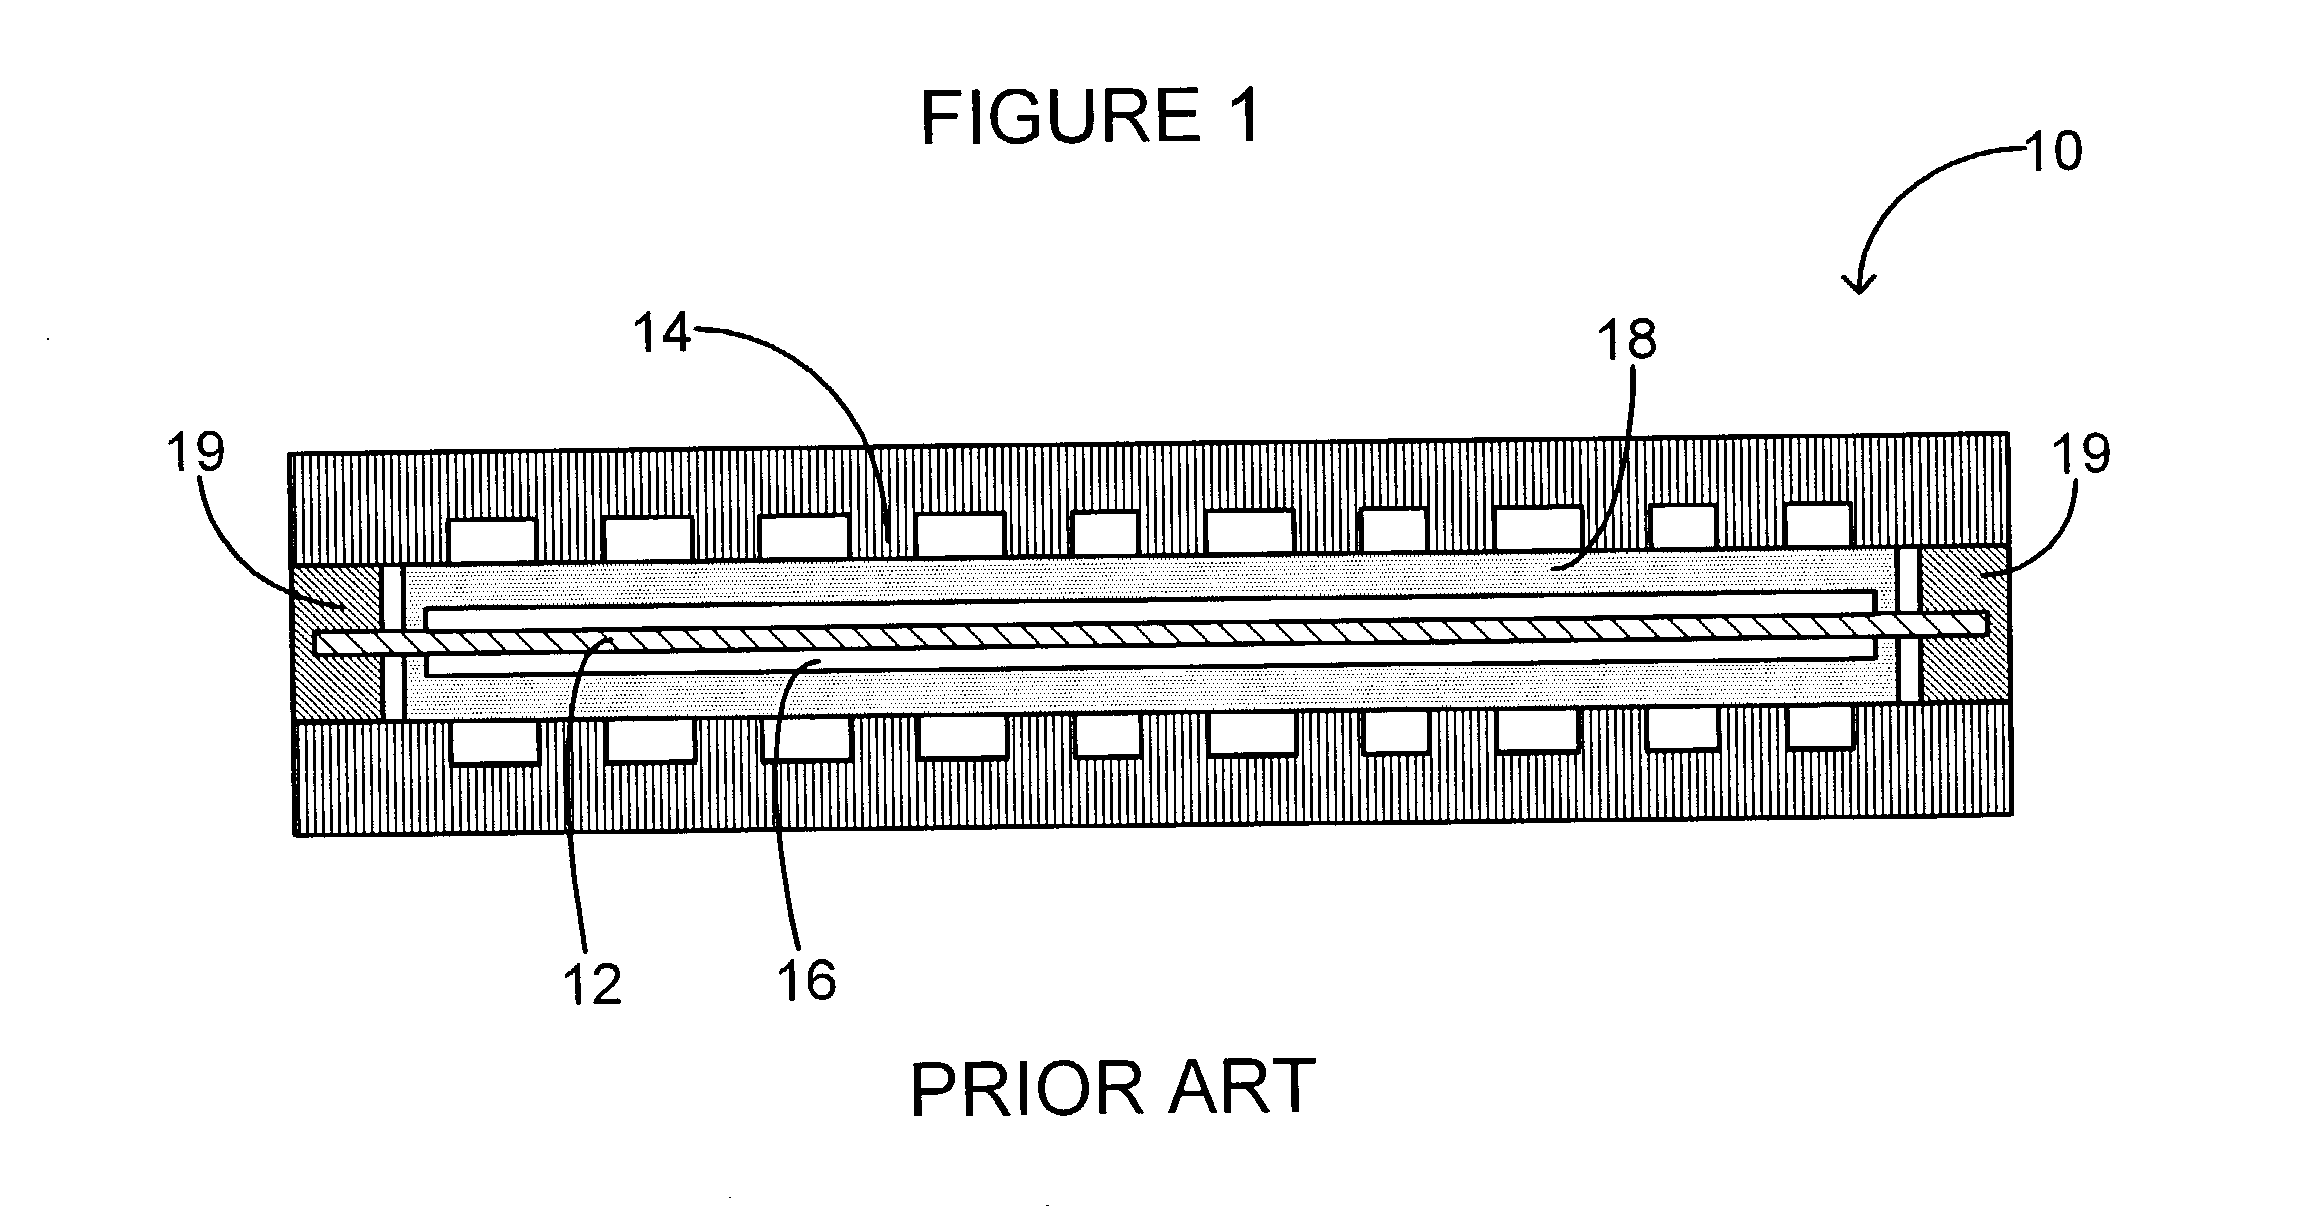 Method of fabricating fuel cells and membrane electrode assemblies